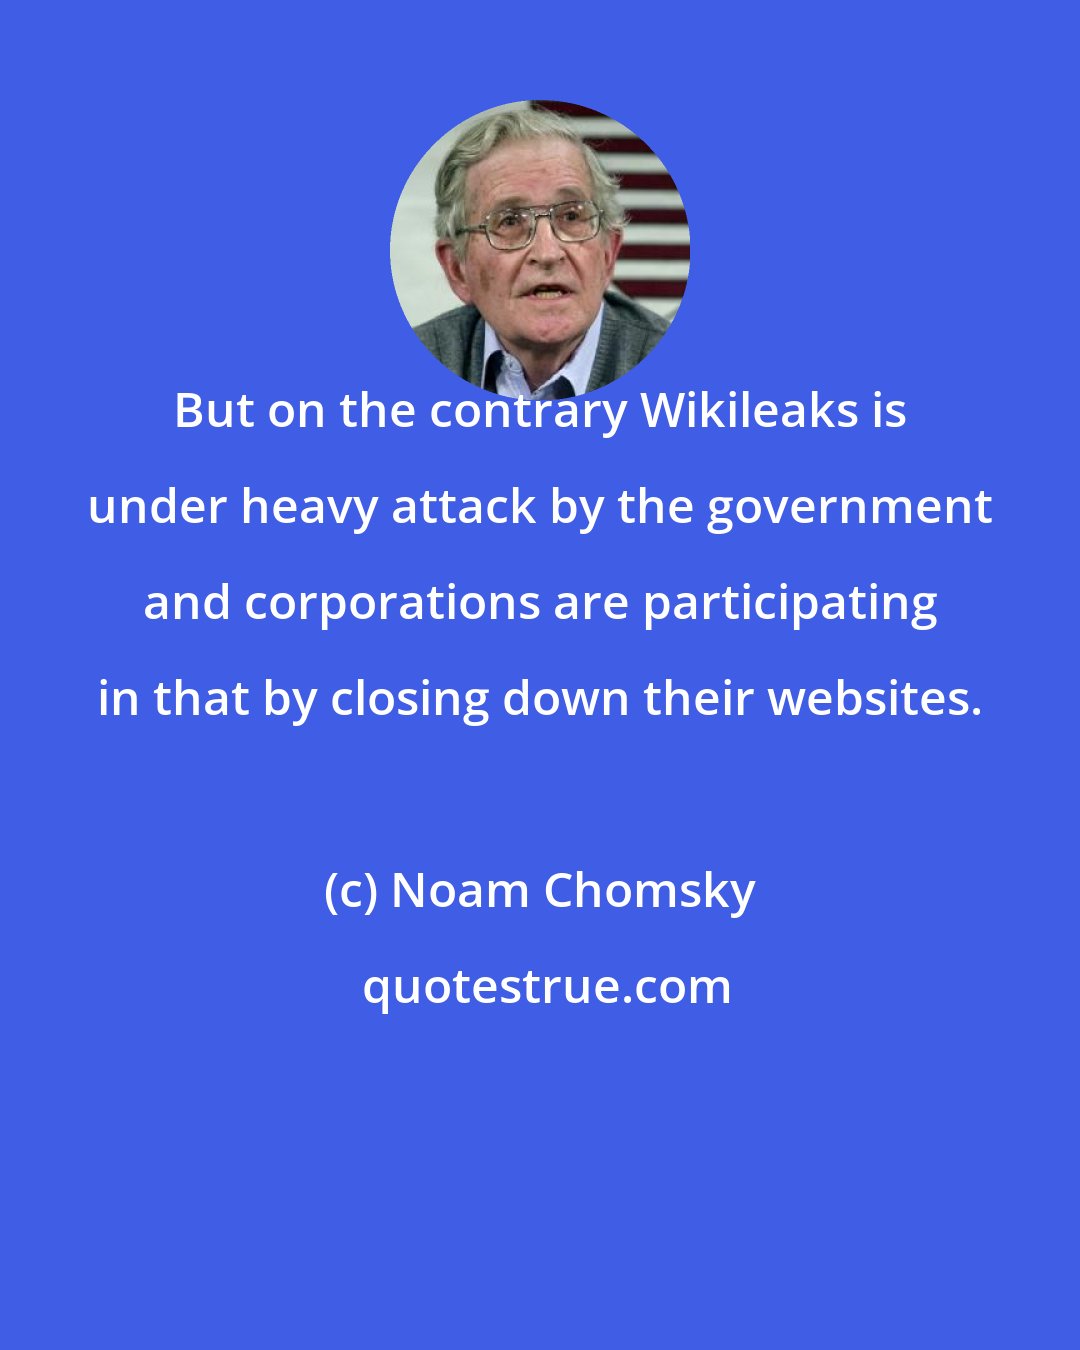 Noam Chomsky: But on the contrary Wikileaks is under heavy attack by the government and corporations are participating in that by closing down their websites.